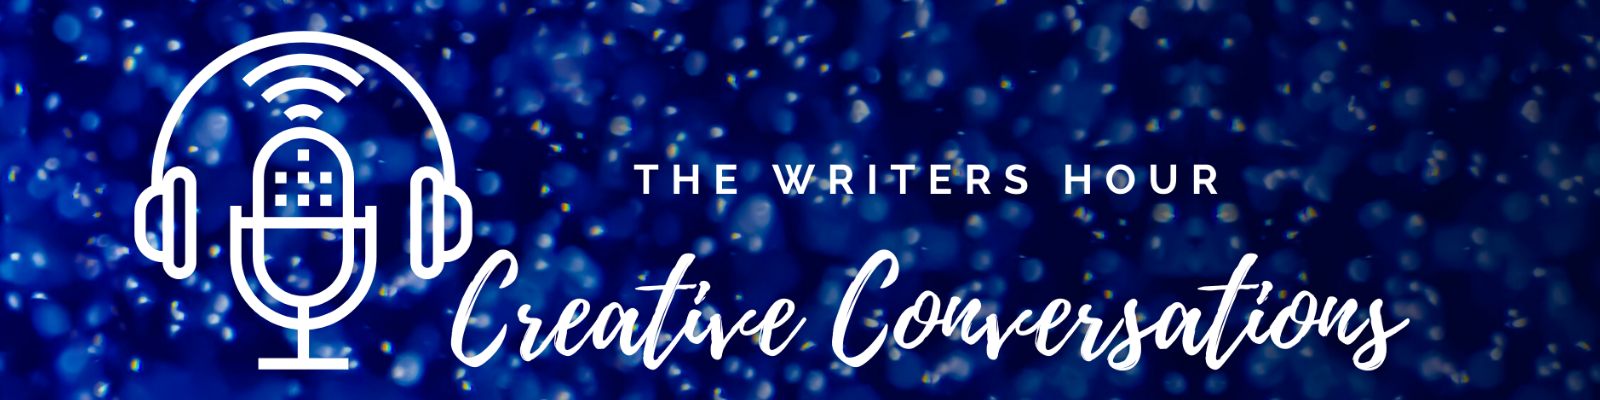 The Writers Hour Creative Conversations